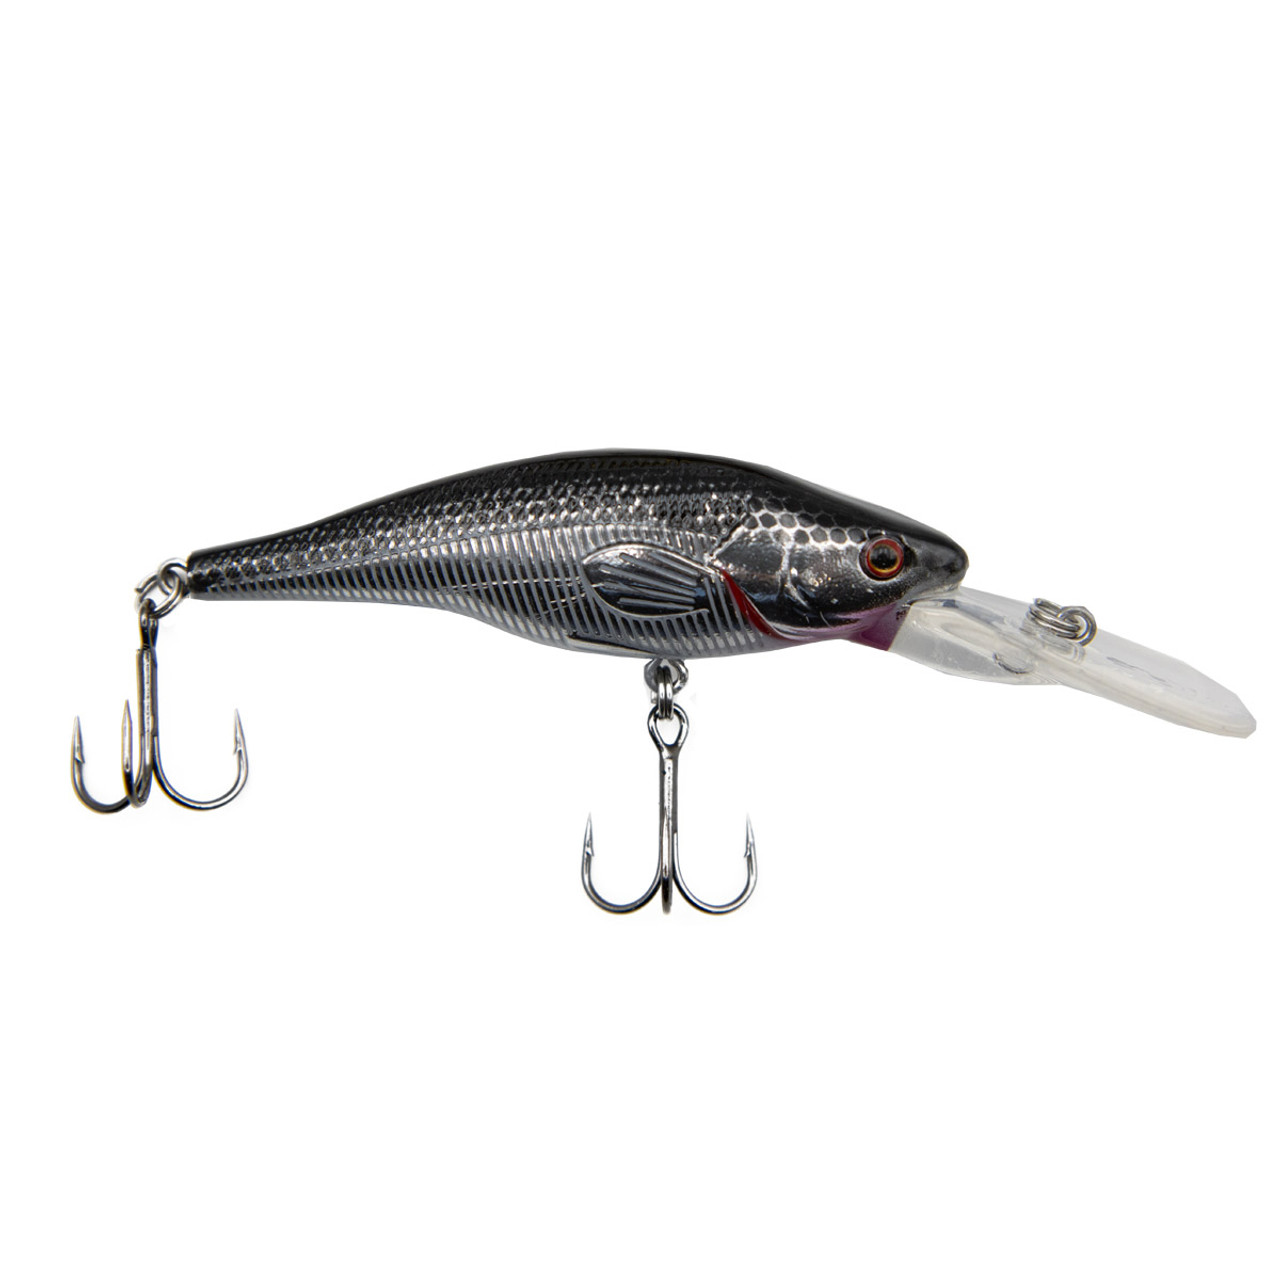 Rogers Sporting Goods Impulse Shad 75 Crankbait in Tennessee Shad